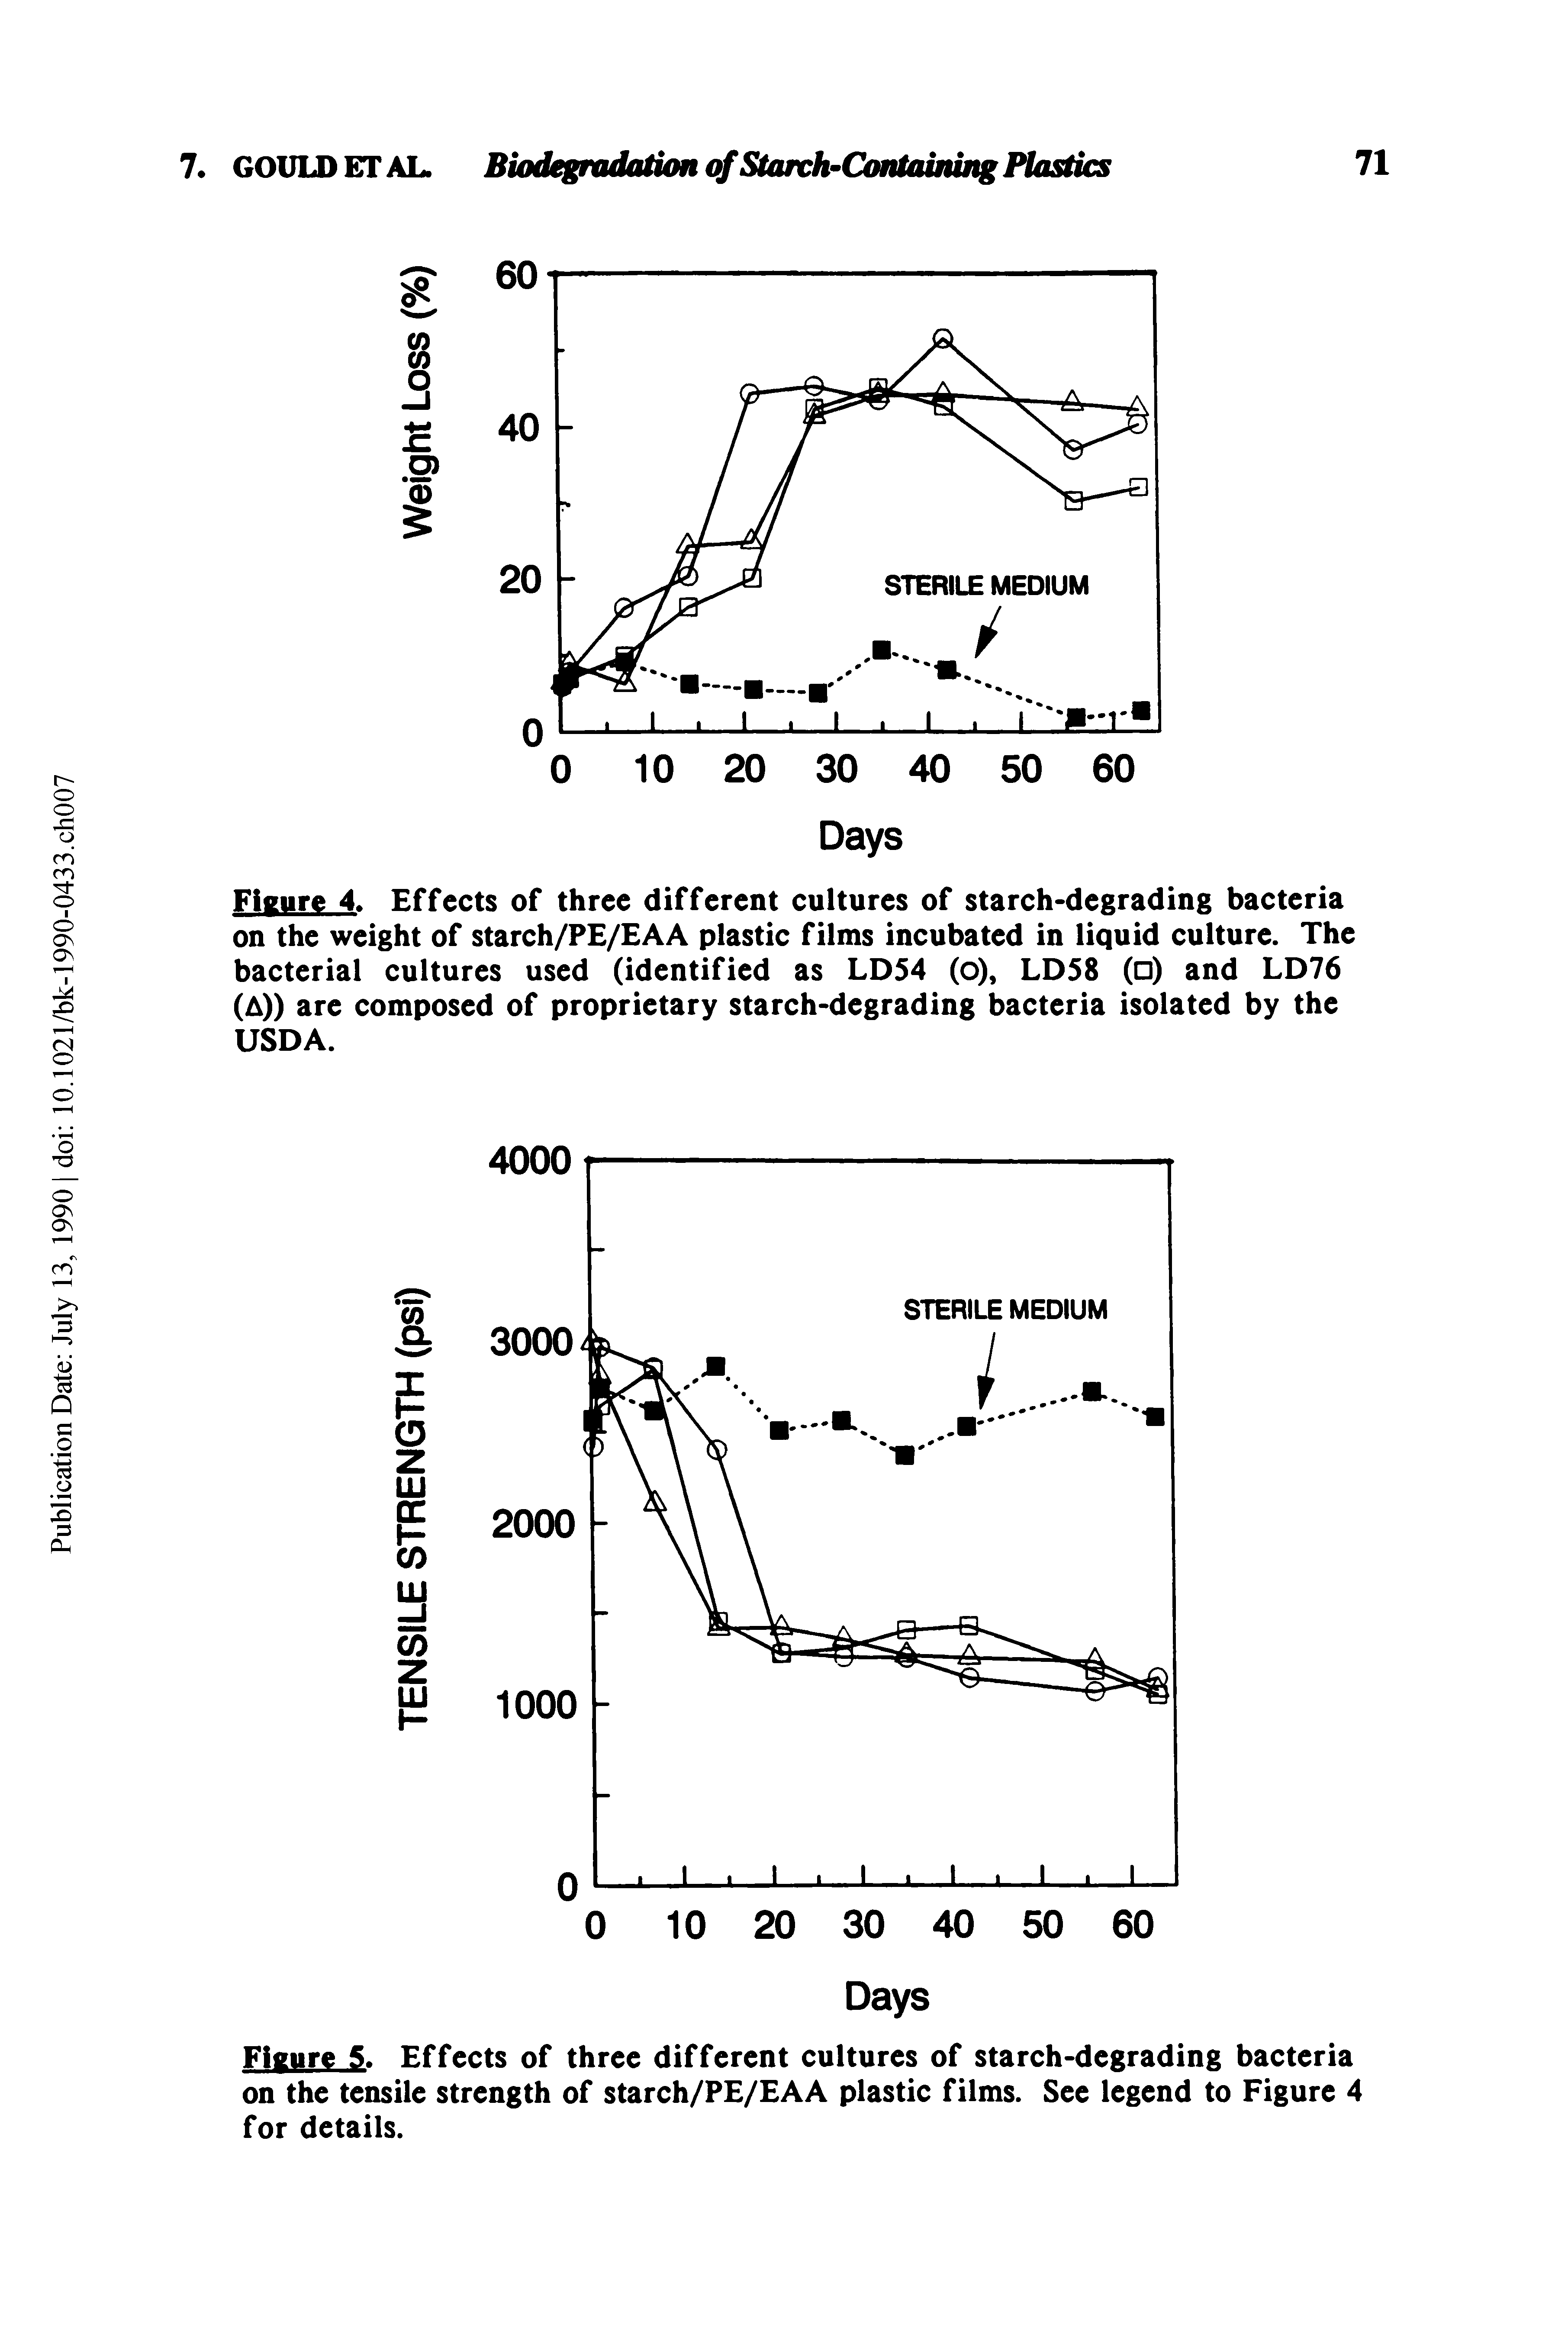 Figure 4> Effects of three different cultures of starch-degrading bacteria on the weight of starch/P / AA plastic films incubated in liquid culture. The bacterial cultures used (identified as LD54 (o), LD58 ( ) and LD76 (A)) are composed of proprietary starch-degrading bacteria isolated by the USDA.